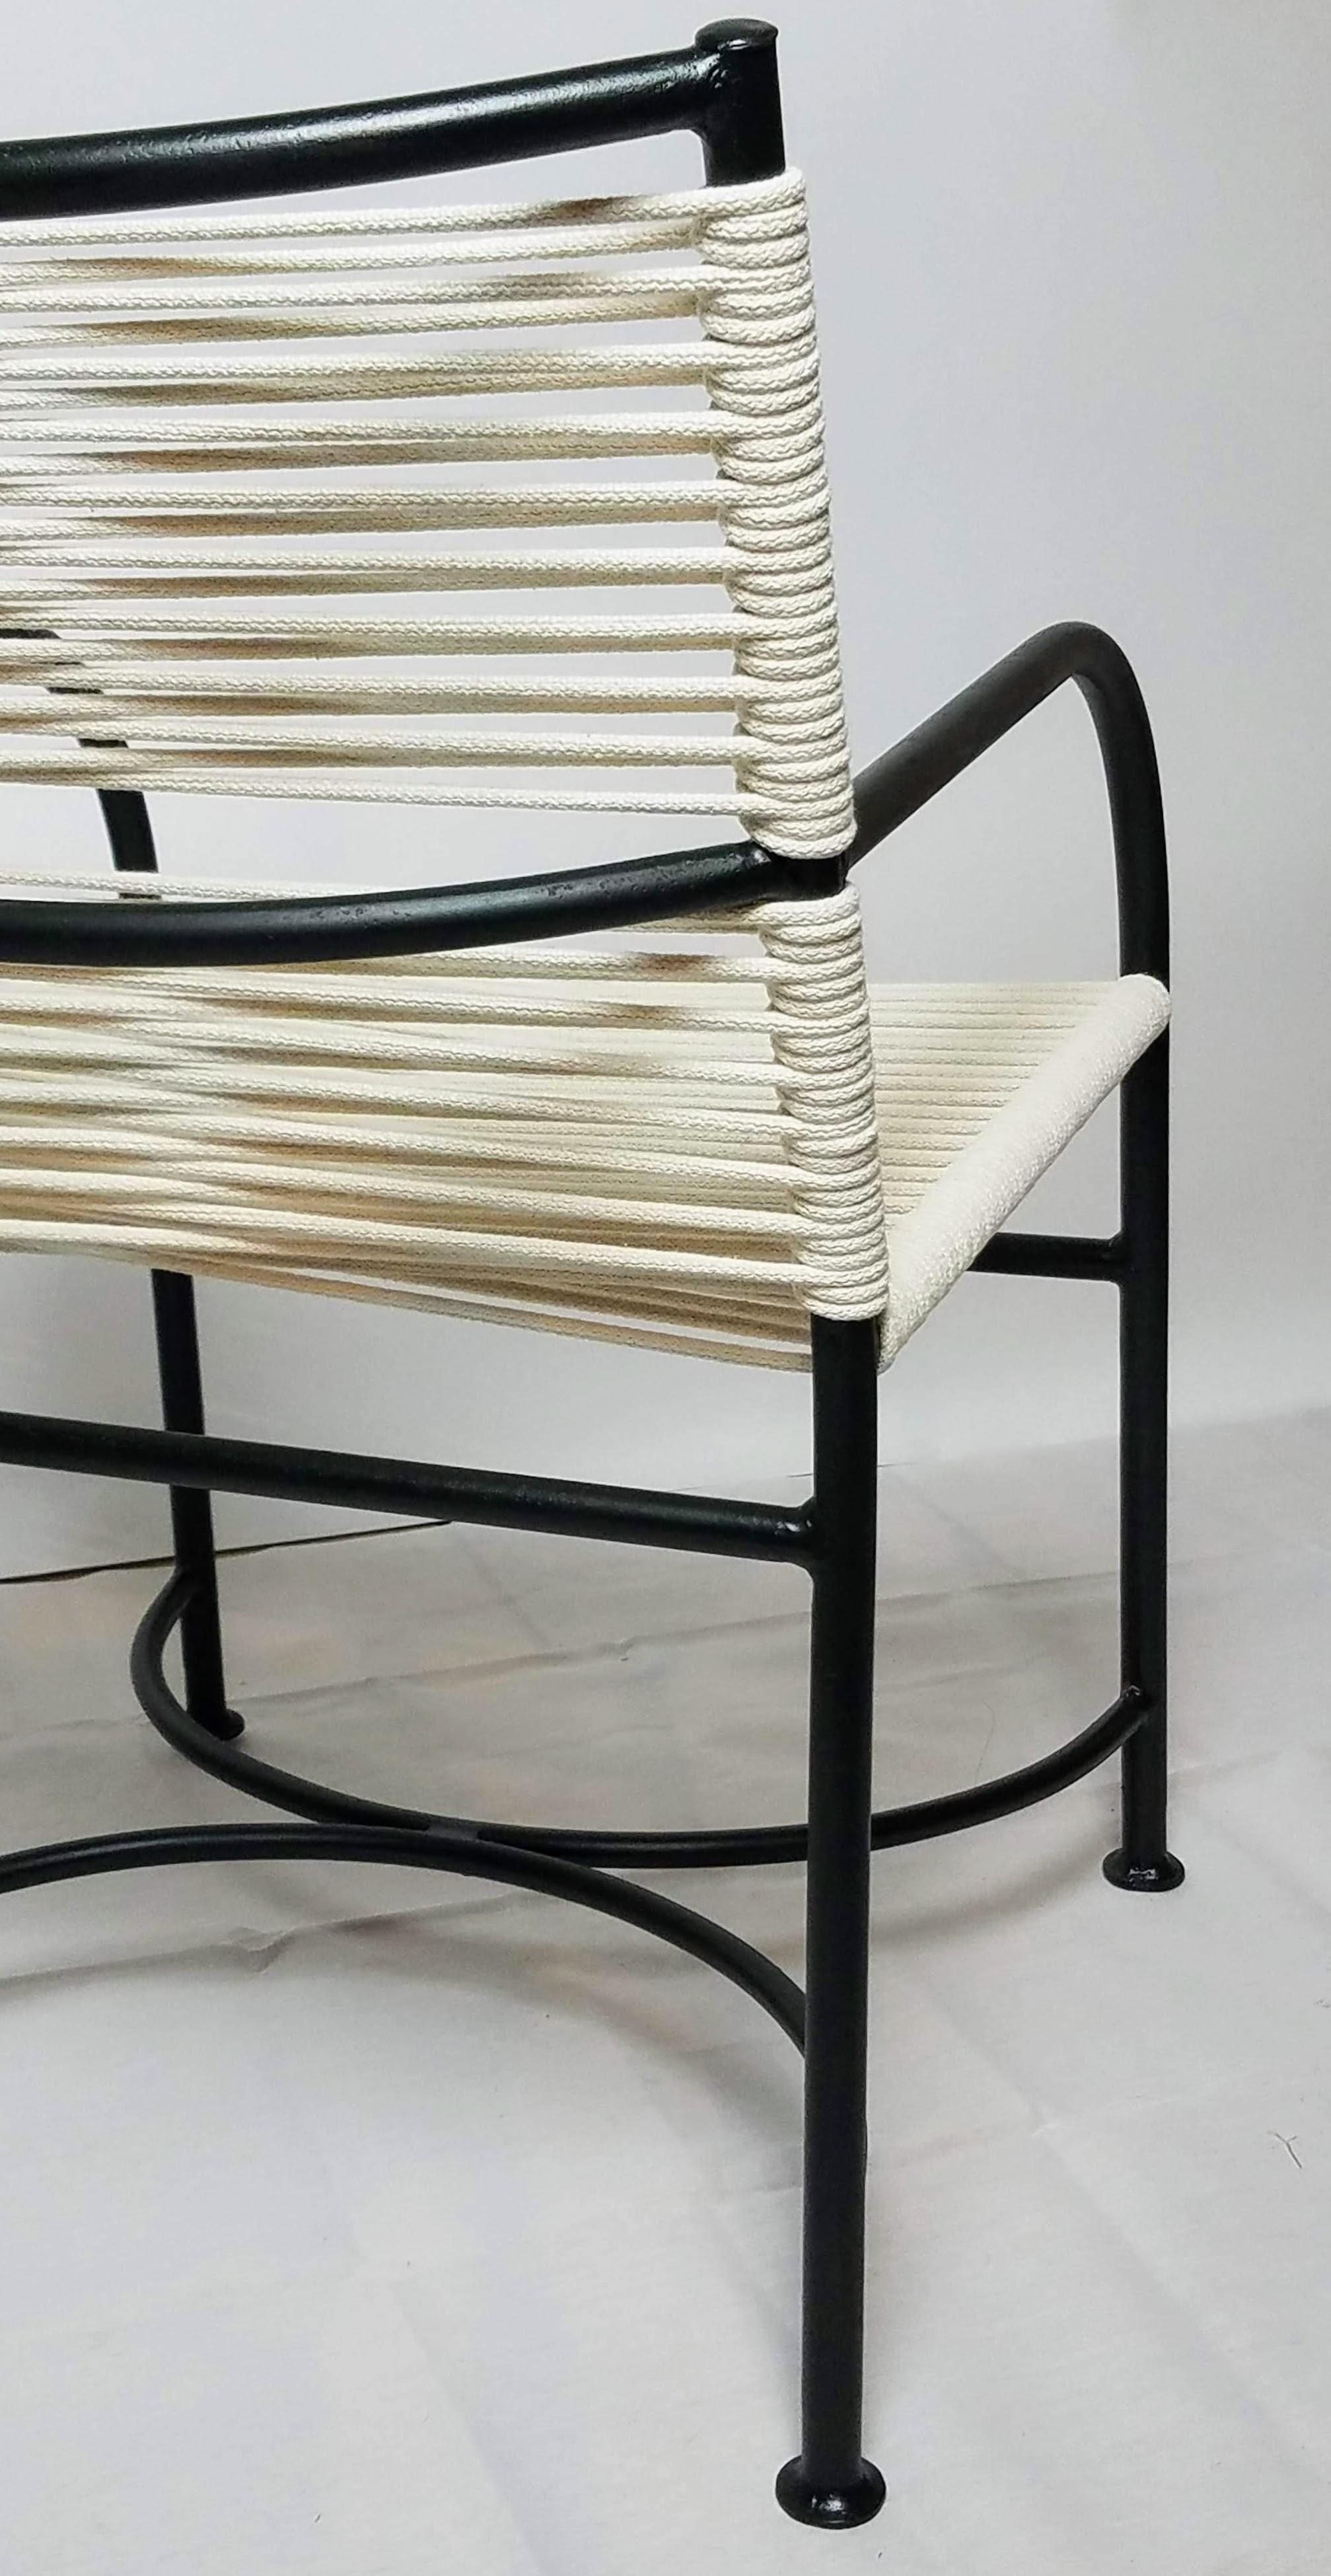 Robert Lewis Pair Steel Pipe Armchairs Hand Built Santa Barbara CA, 1930s/40s In Good Condition For Sale In Camden, ME